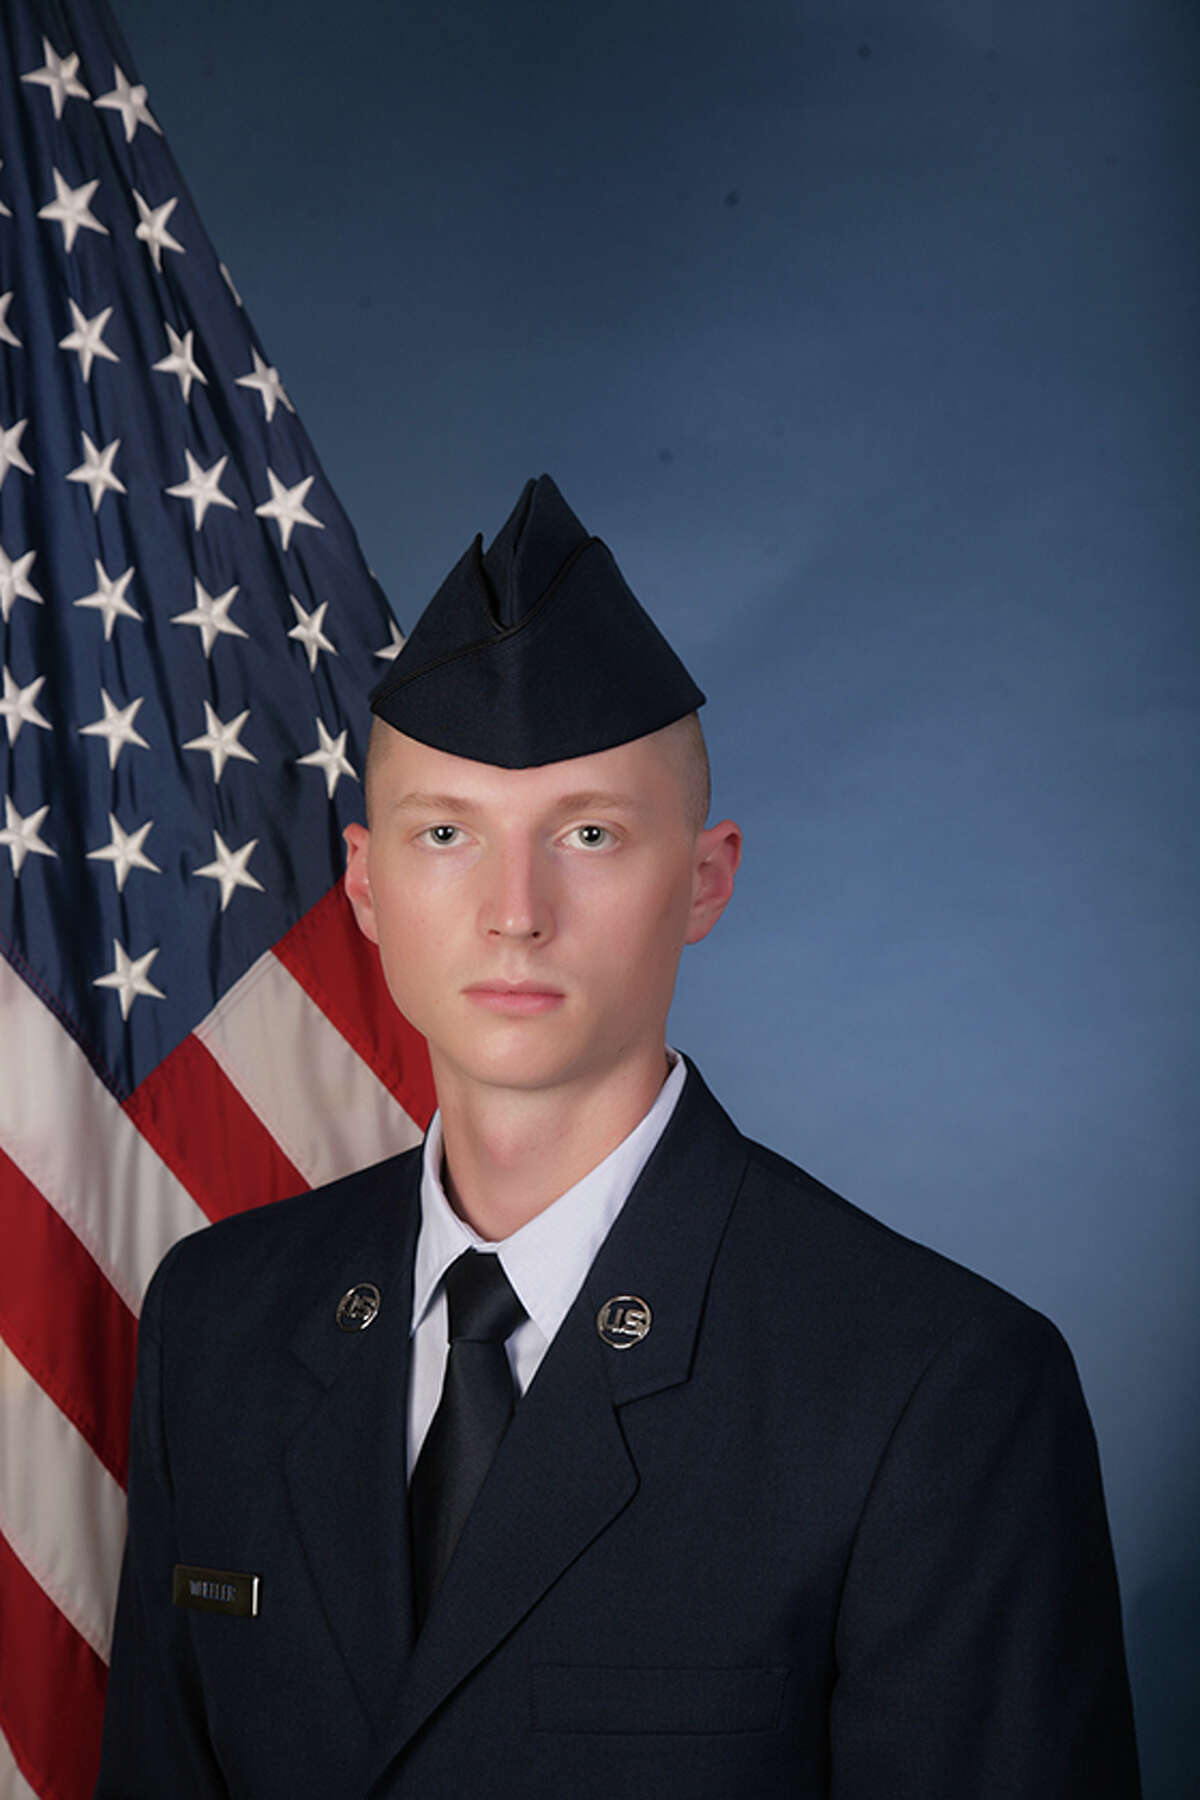 U.S. Air Force Airman 1st Class Michael L. Wheeler recently graduated from basic training at Joint Base San Antonio-Lackland.